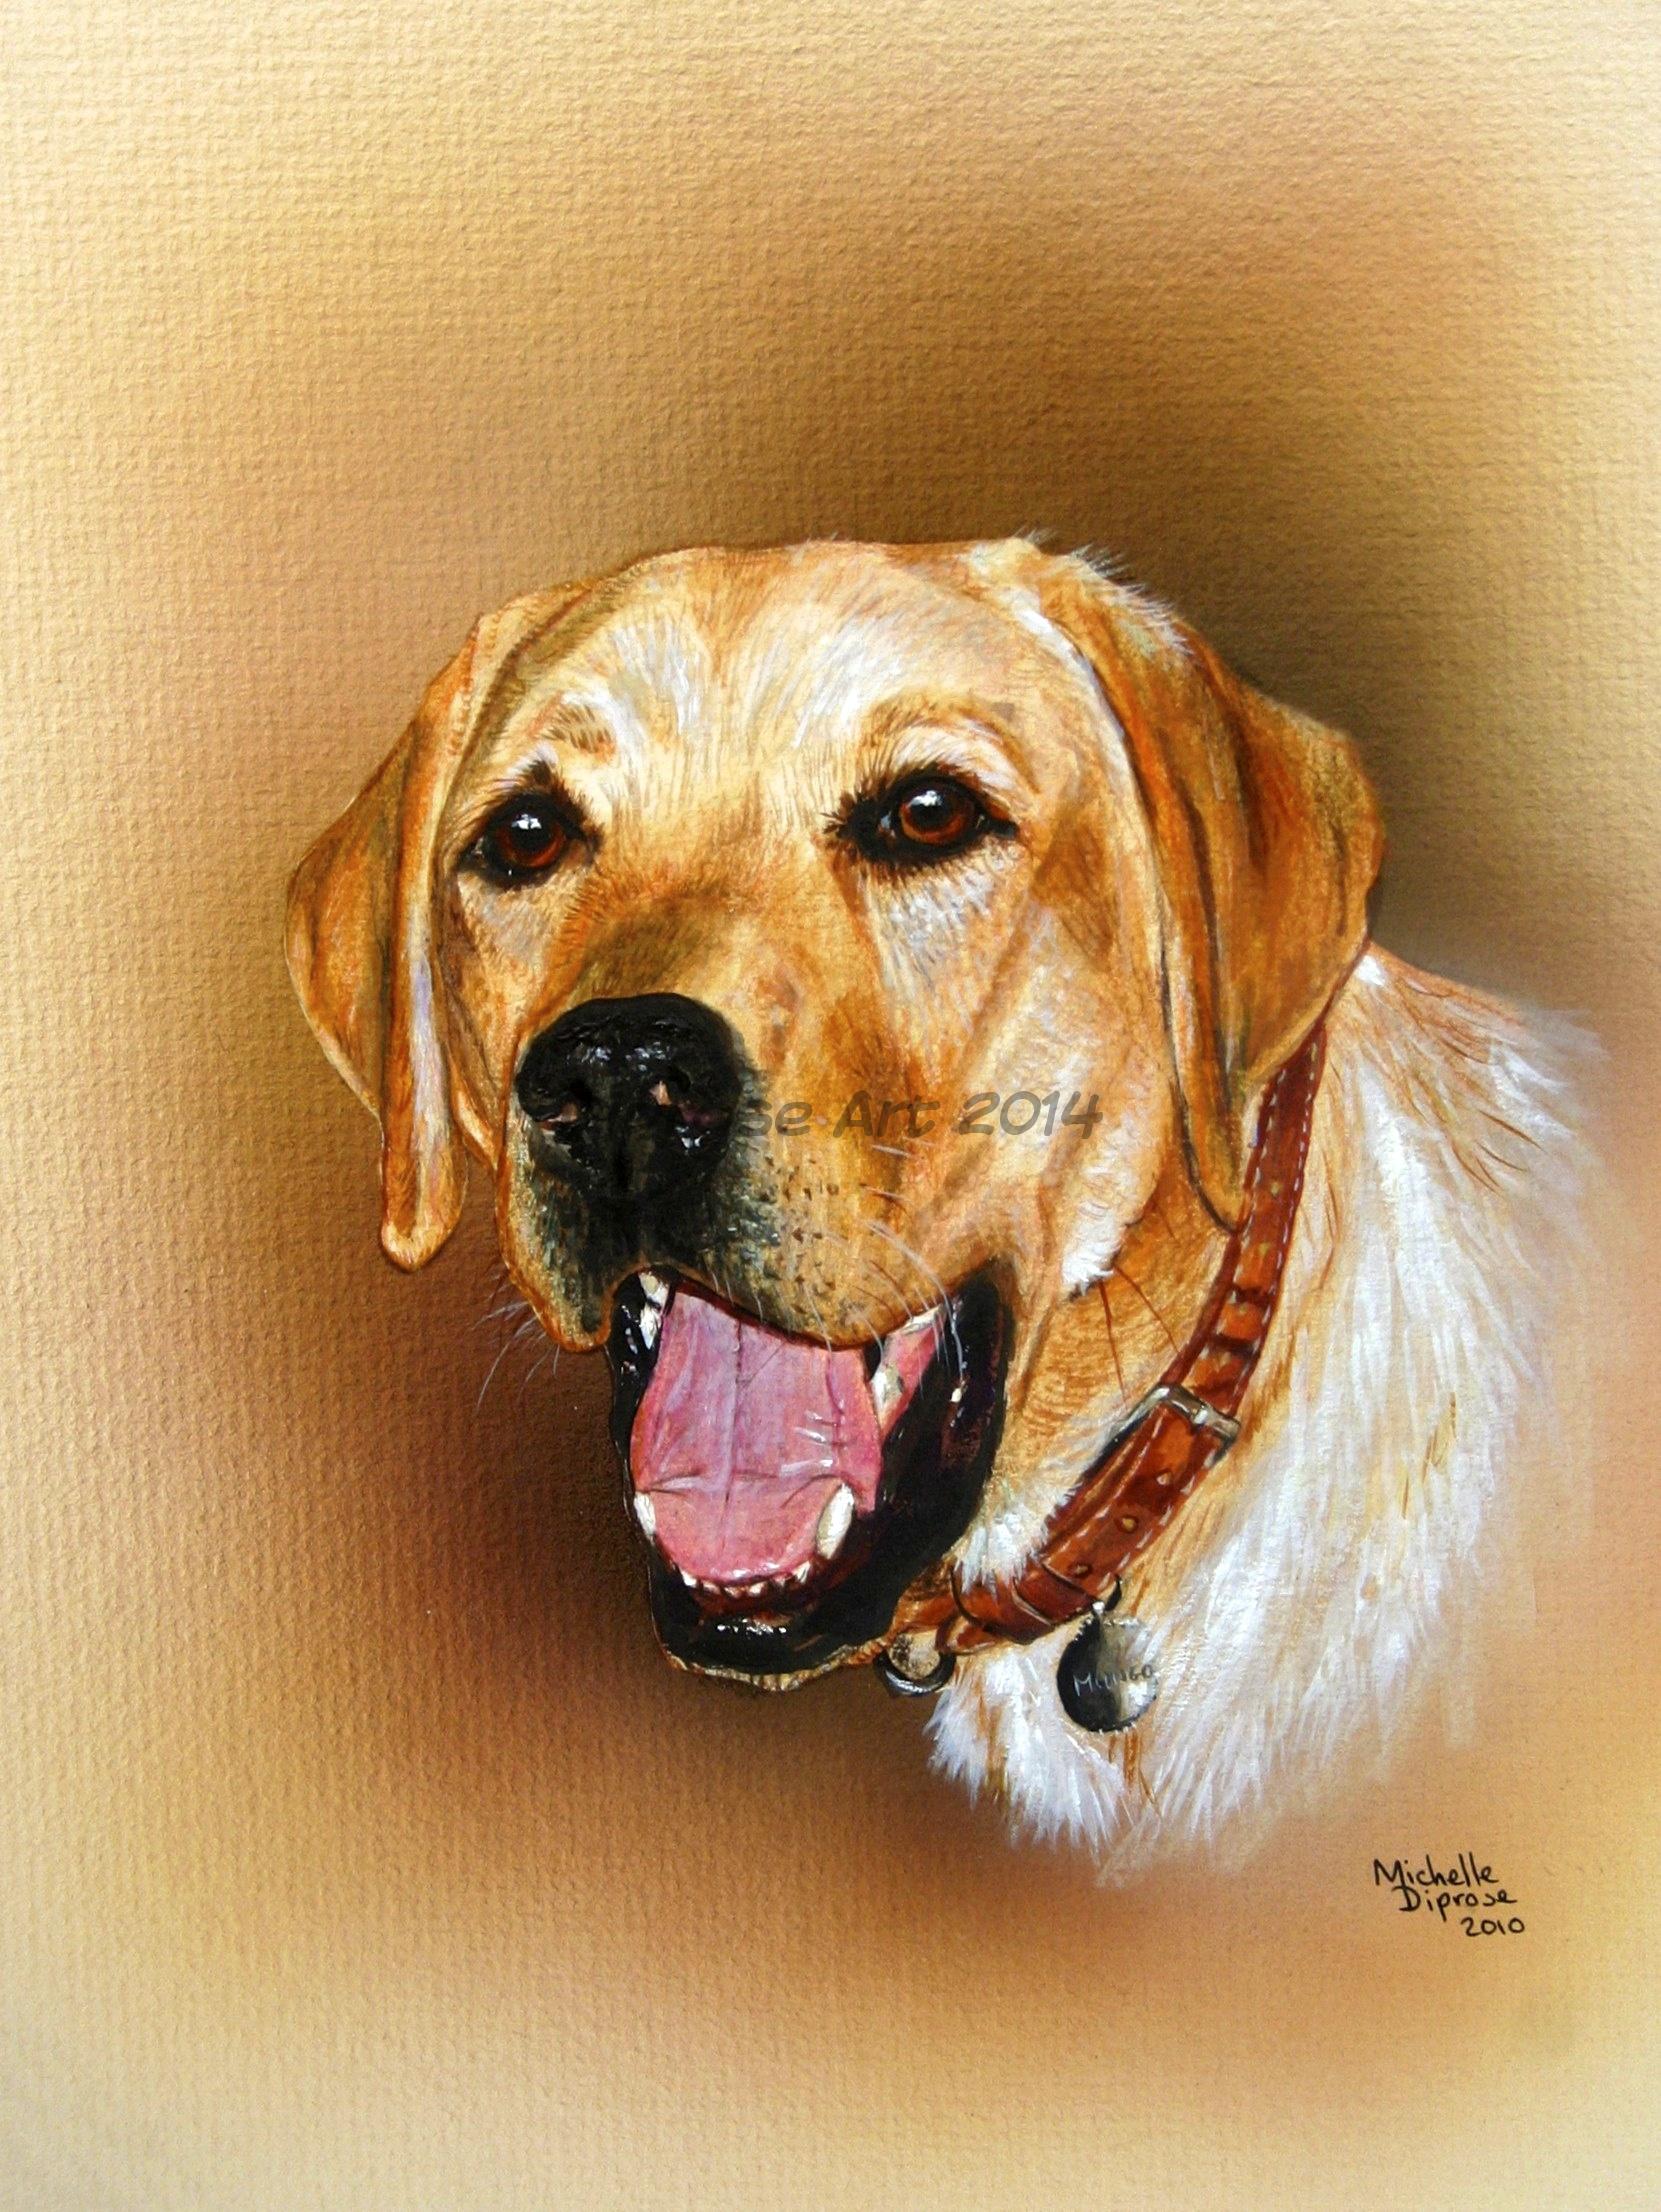 Acrylics on board - approx A4 - pet dog portrait - This golden labrador looks as if he is laughing - I think labradors particularly have a way about them that makes life joyful and fun.